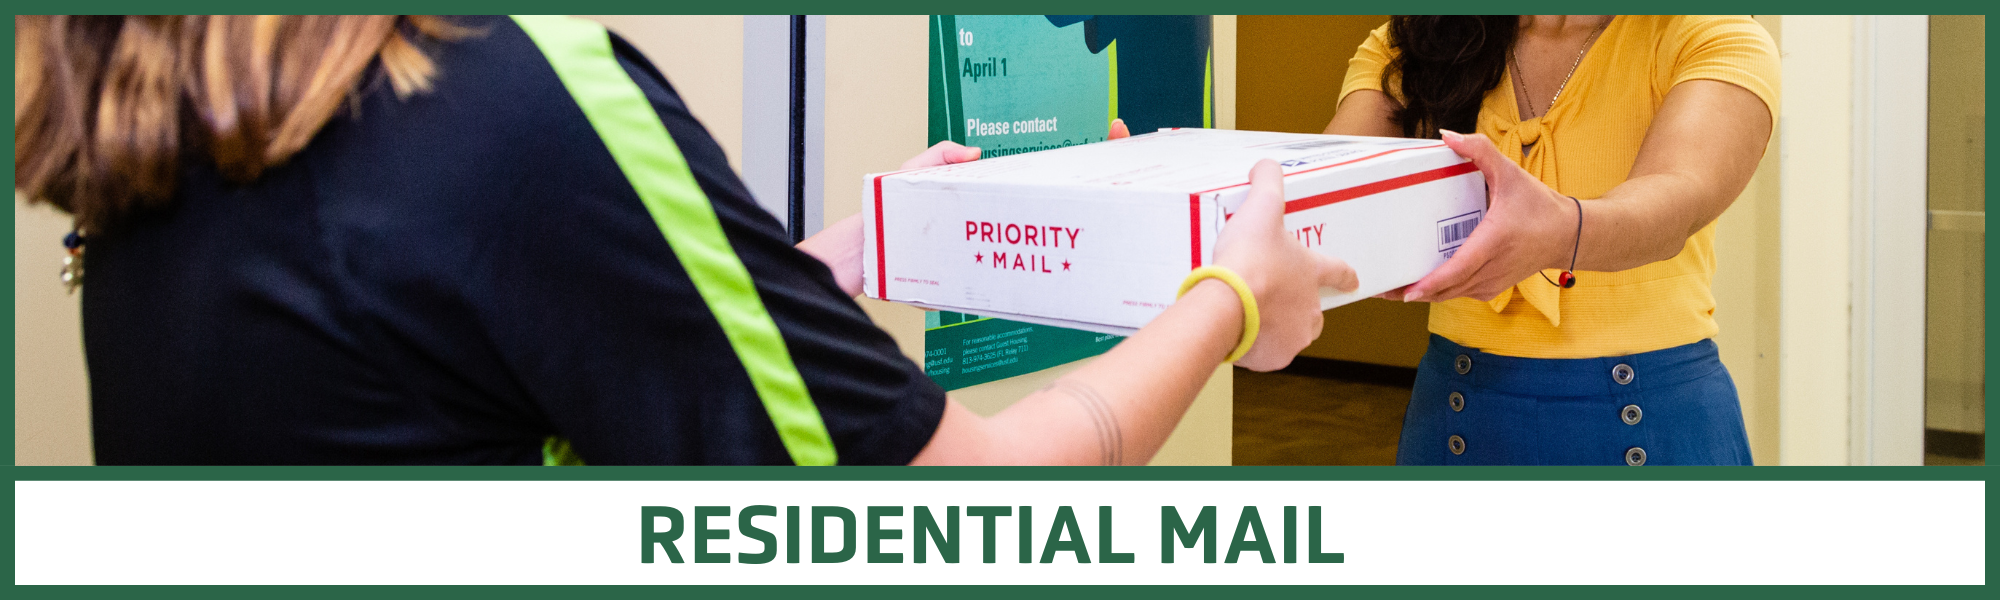 Residential Mail